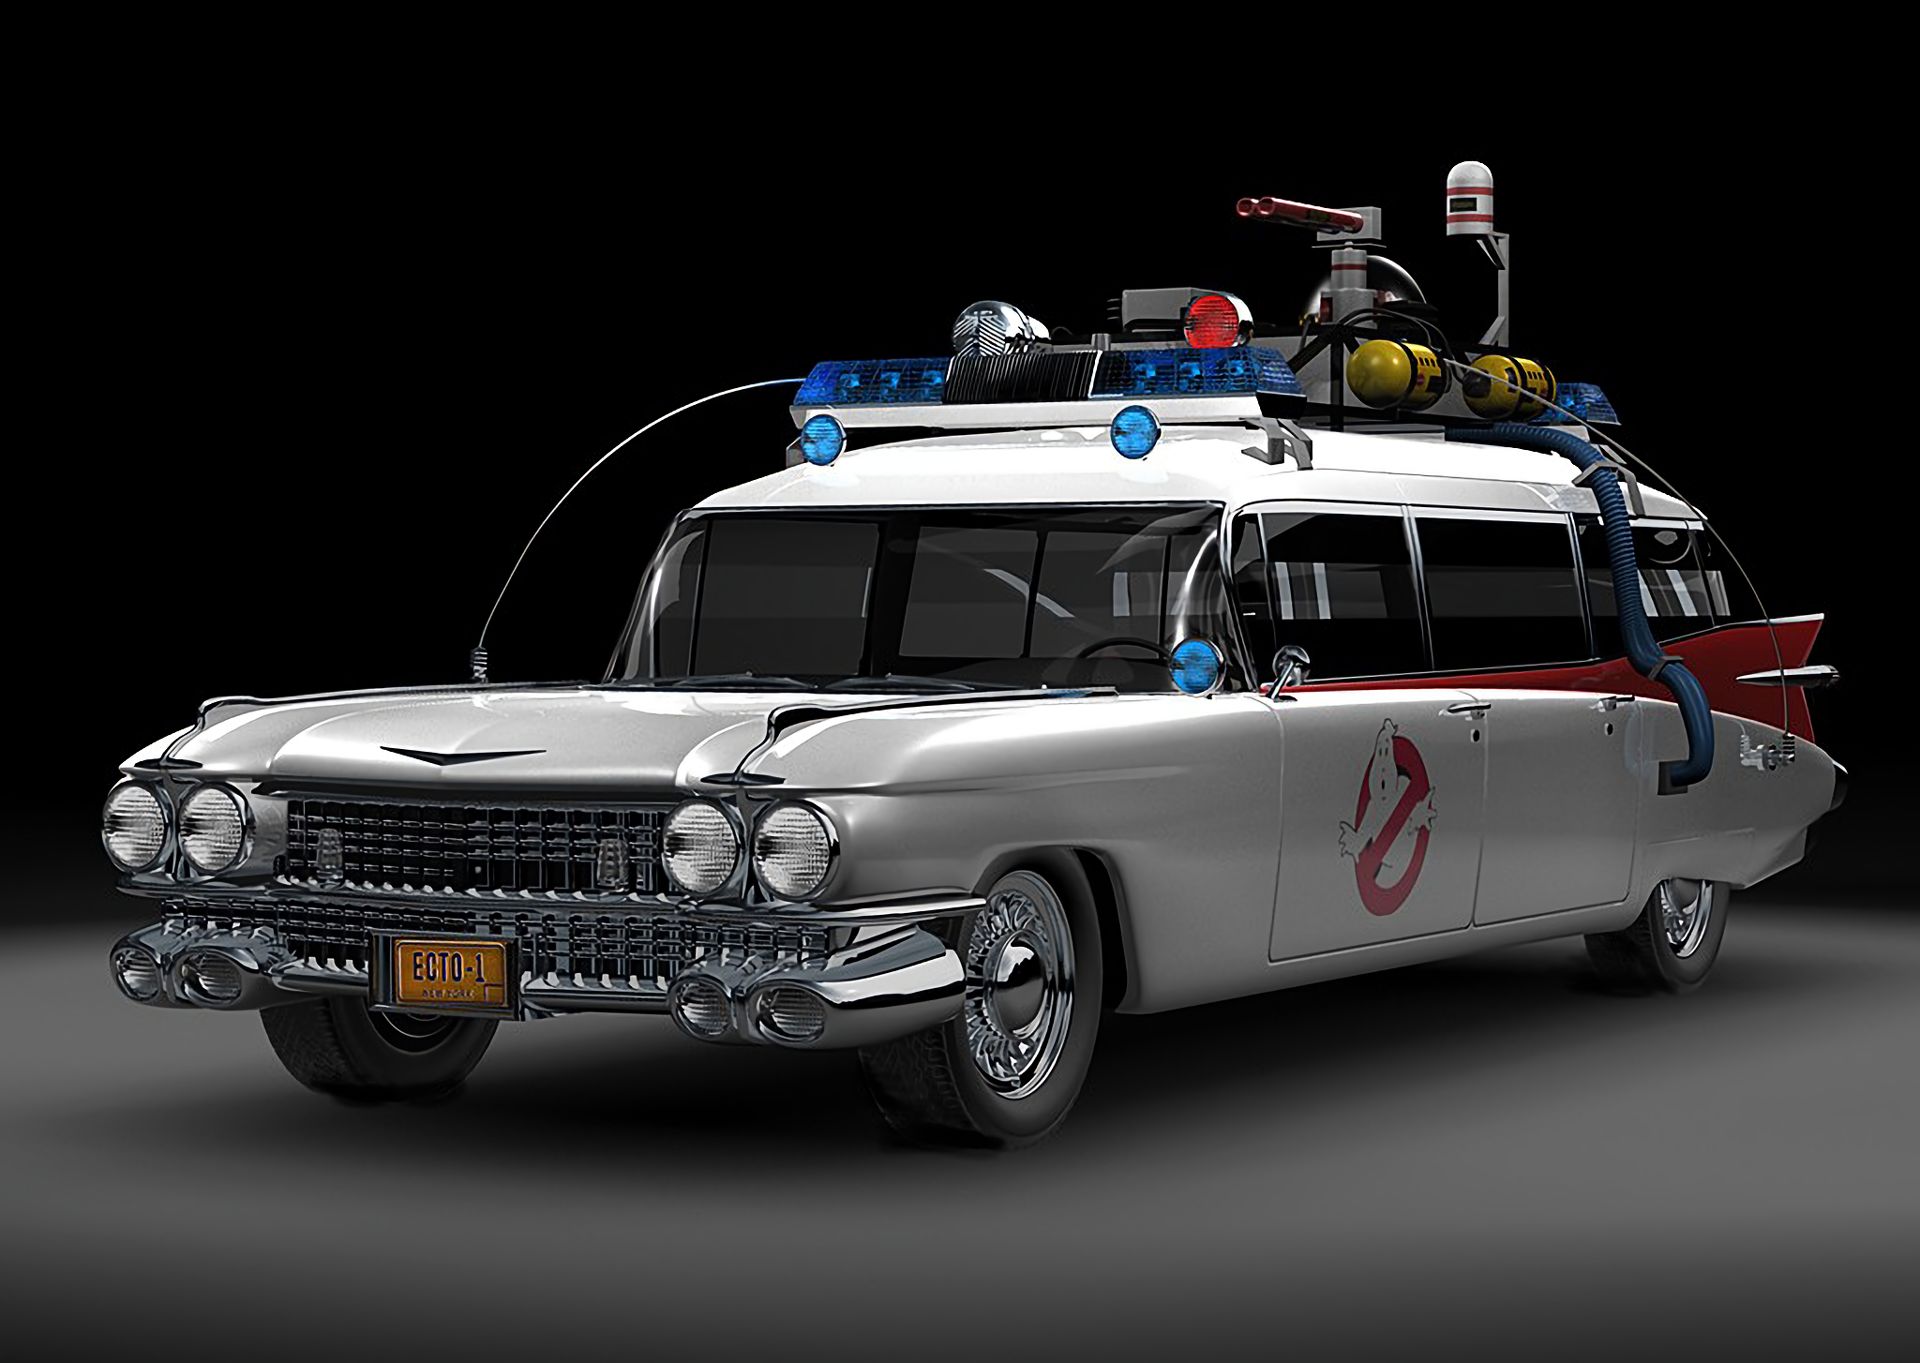 Wallpaper ID 427120  Movie Ghostbusters Phone Wallpaper  800x1280 free  download